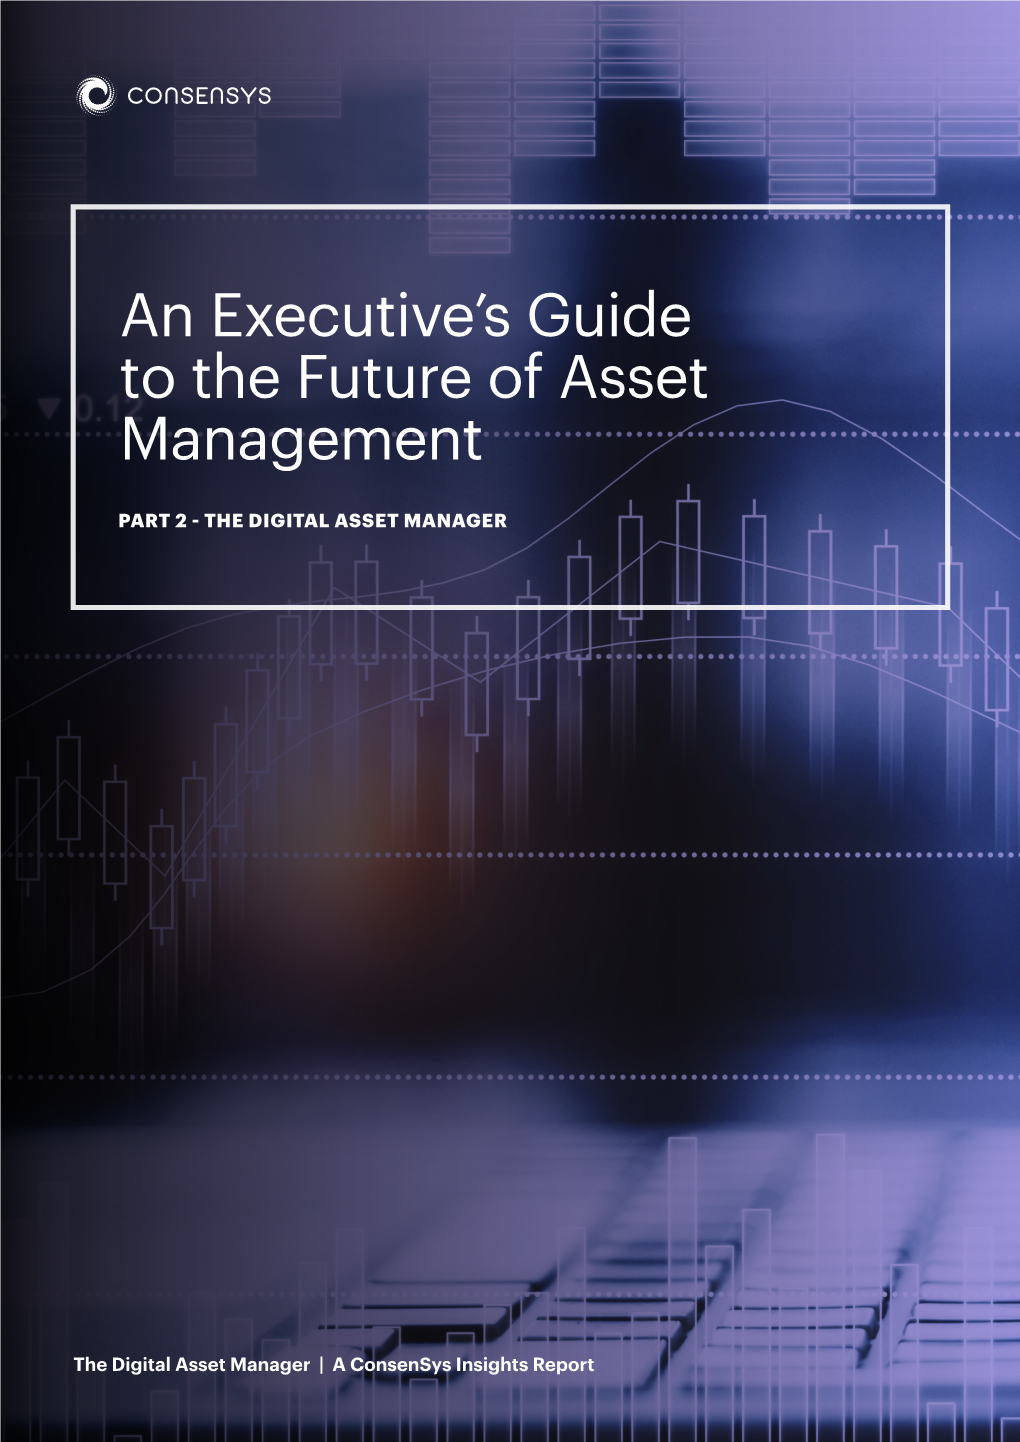 An Executive's Guide to the Future of Asset Management